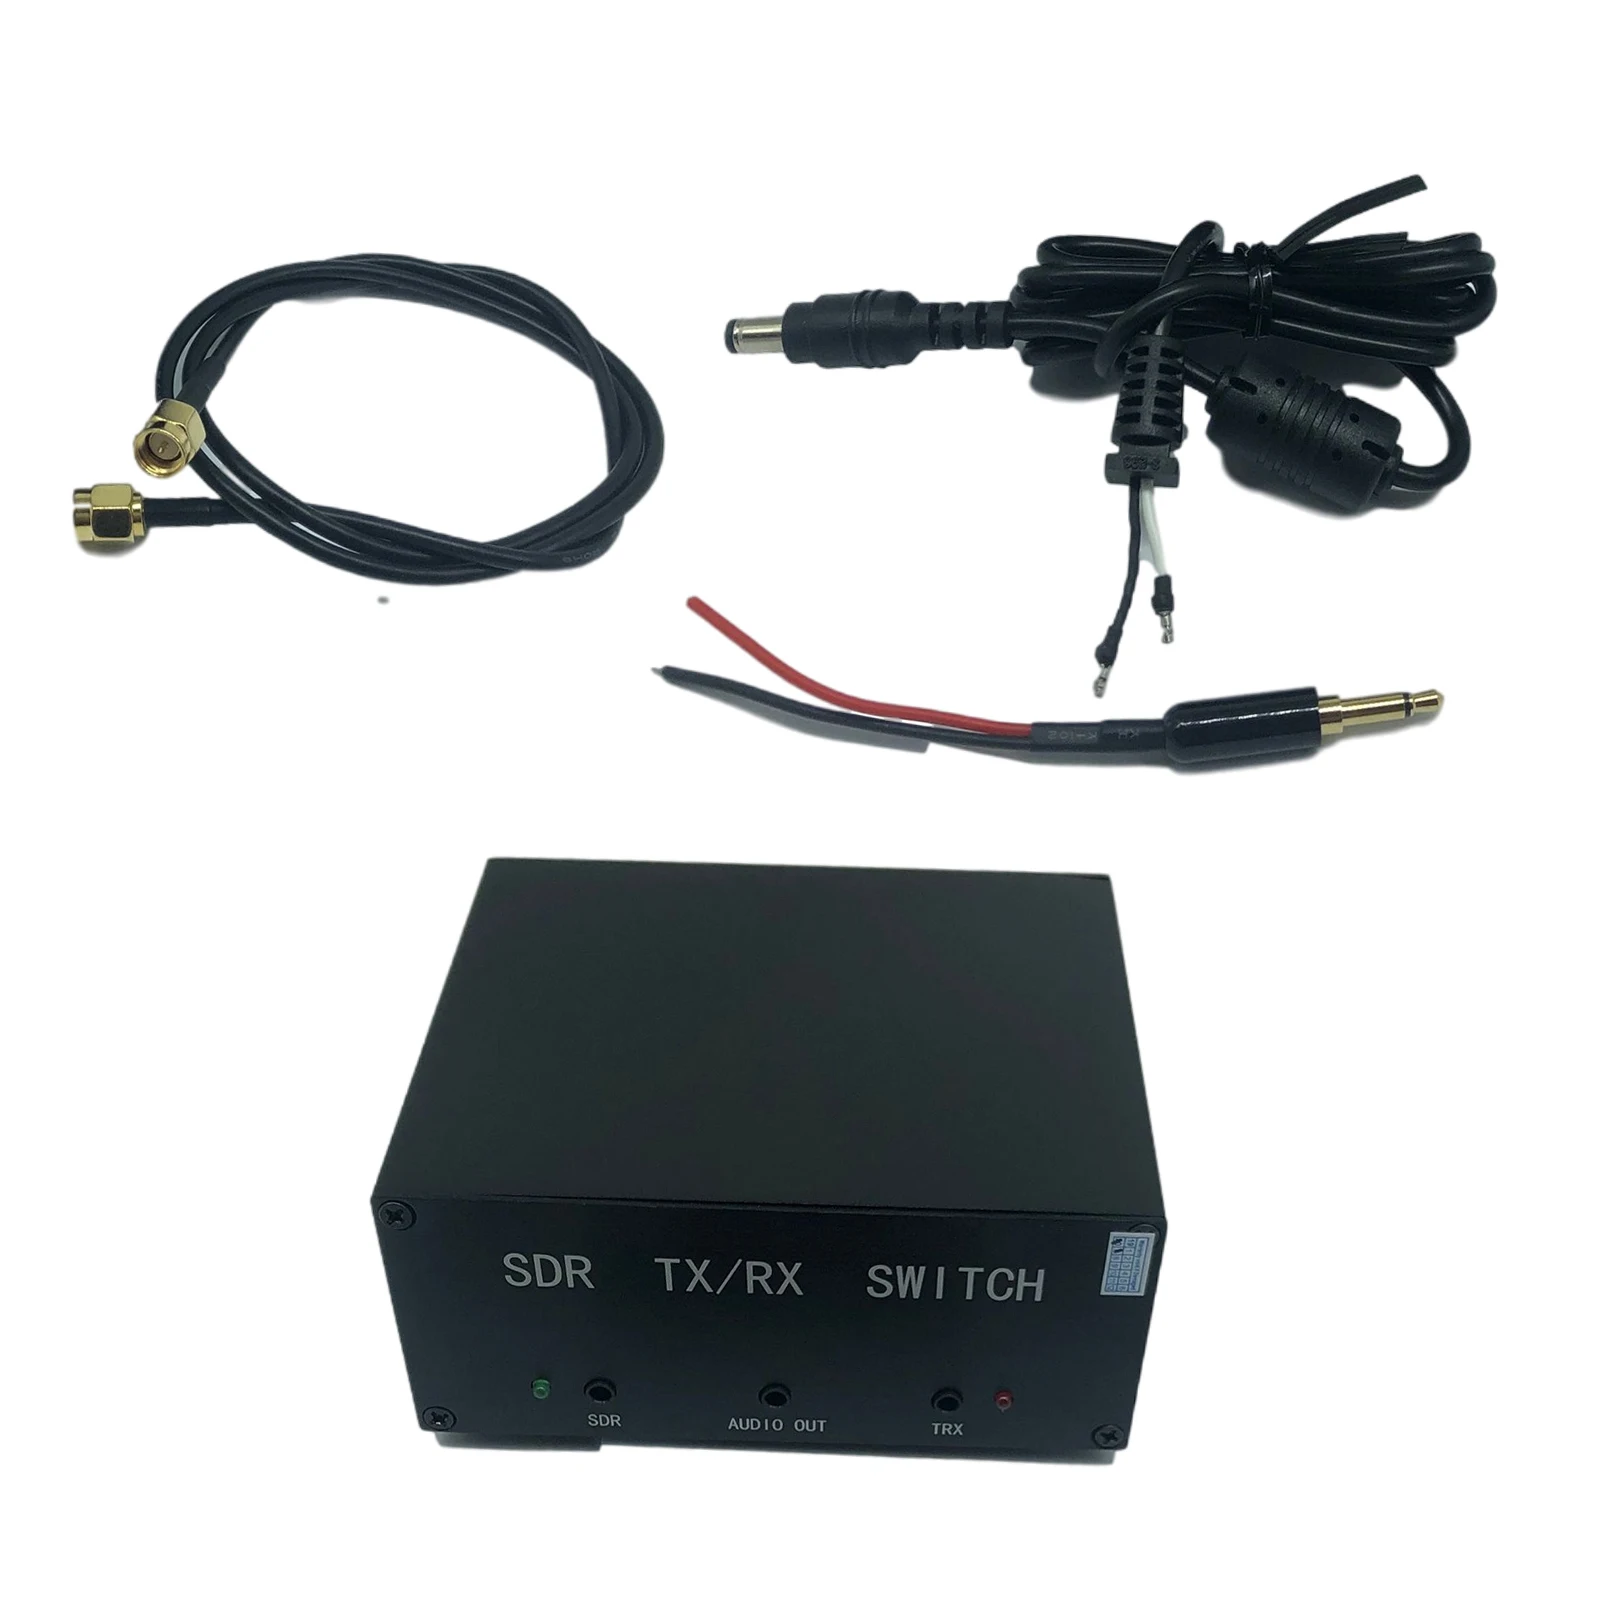 SDR Transceiver and Receiver Switch Antenna Sharer TR Switch Box with Gas Discharge Protection Metal Box Device DC-160MHz